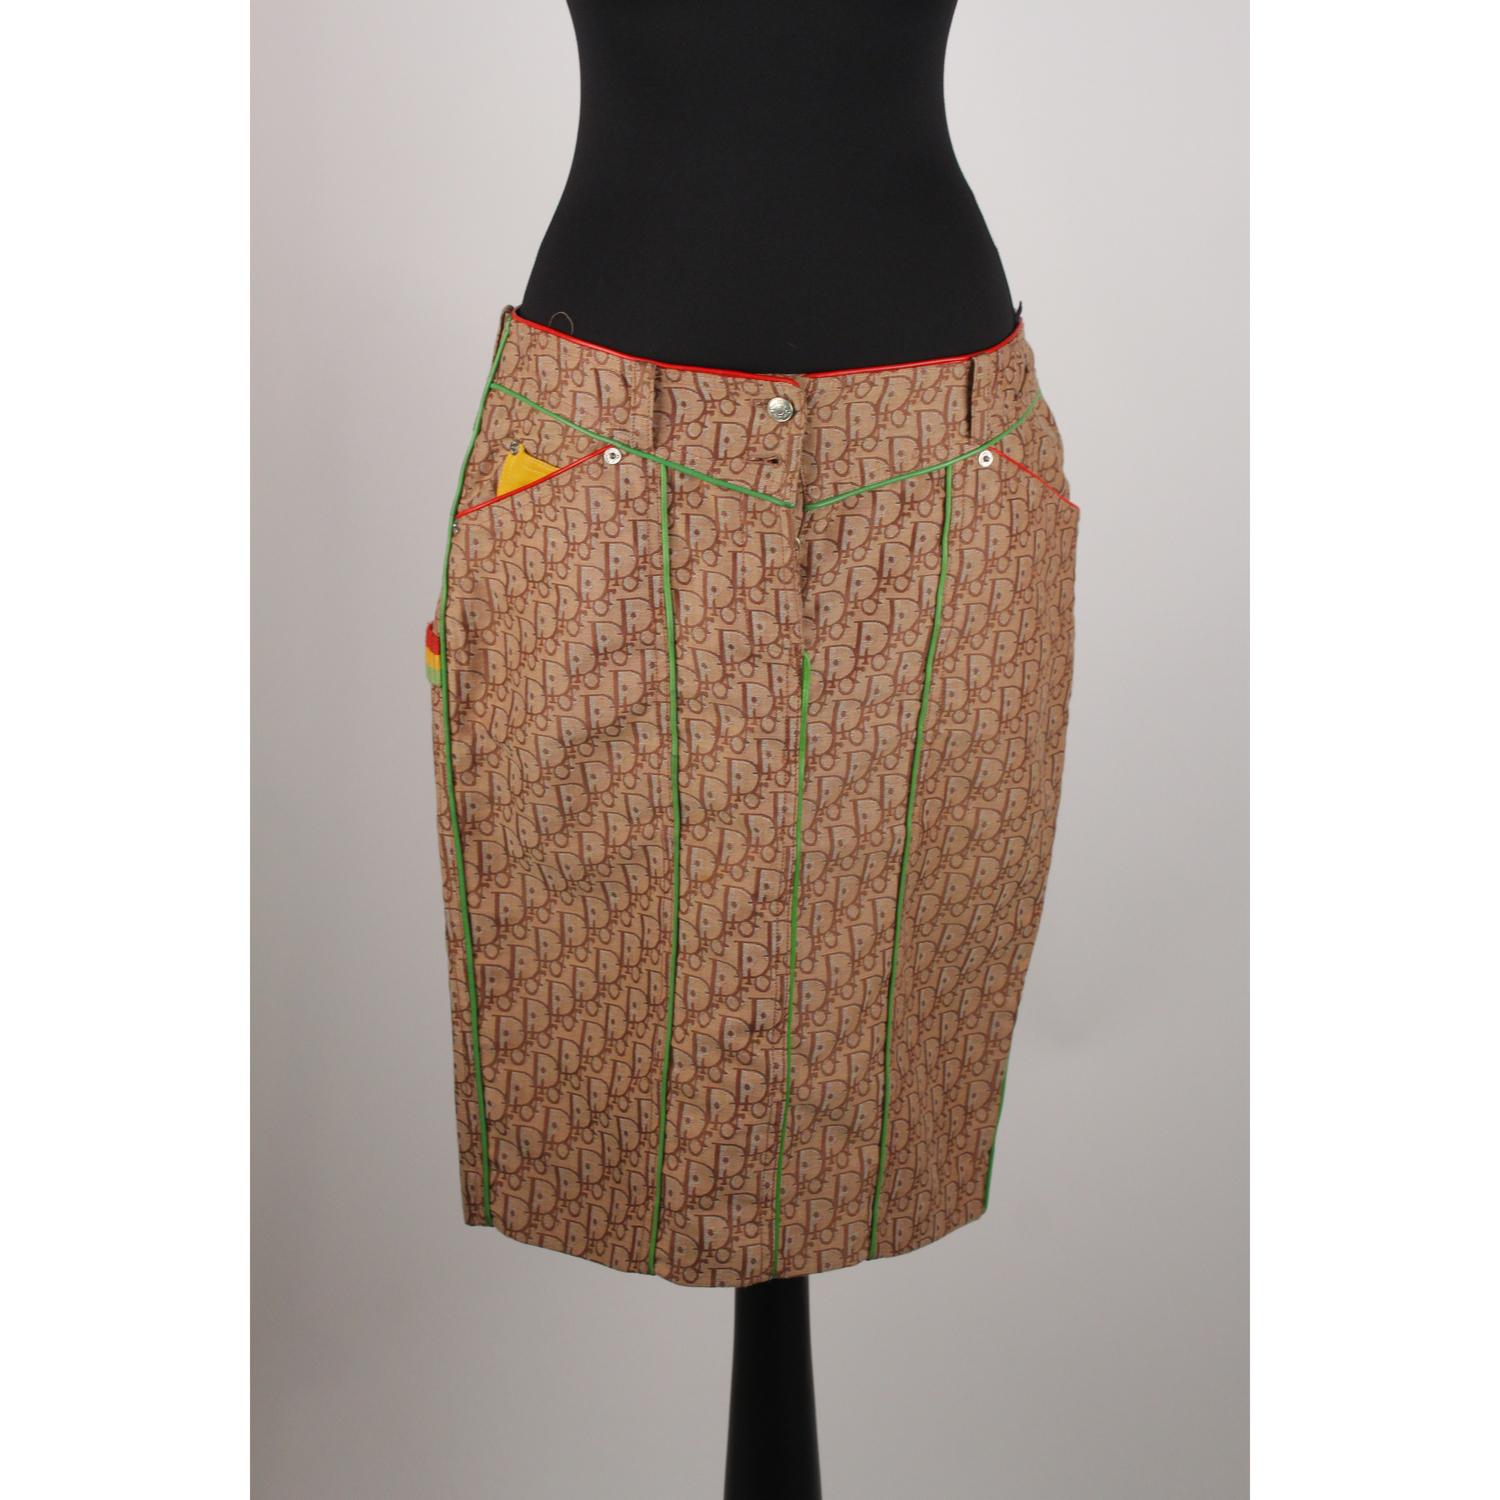 - CHRISTIAN DIOR 'Rasta' Skirt design by John Galliano 
- Period/Era: 2004
- Beige Dior monogram jacquard
- Red and green leather trim 
- Belt loop details 
- 2 yellow patch pockets on the back
- Rear Vent
- Made in Portugal
- Composition: 66%